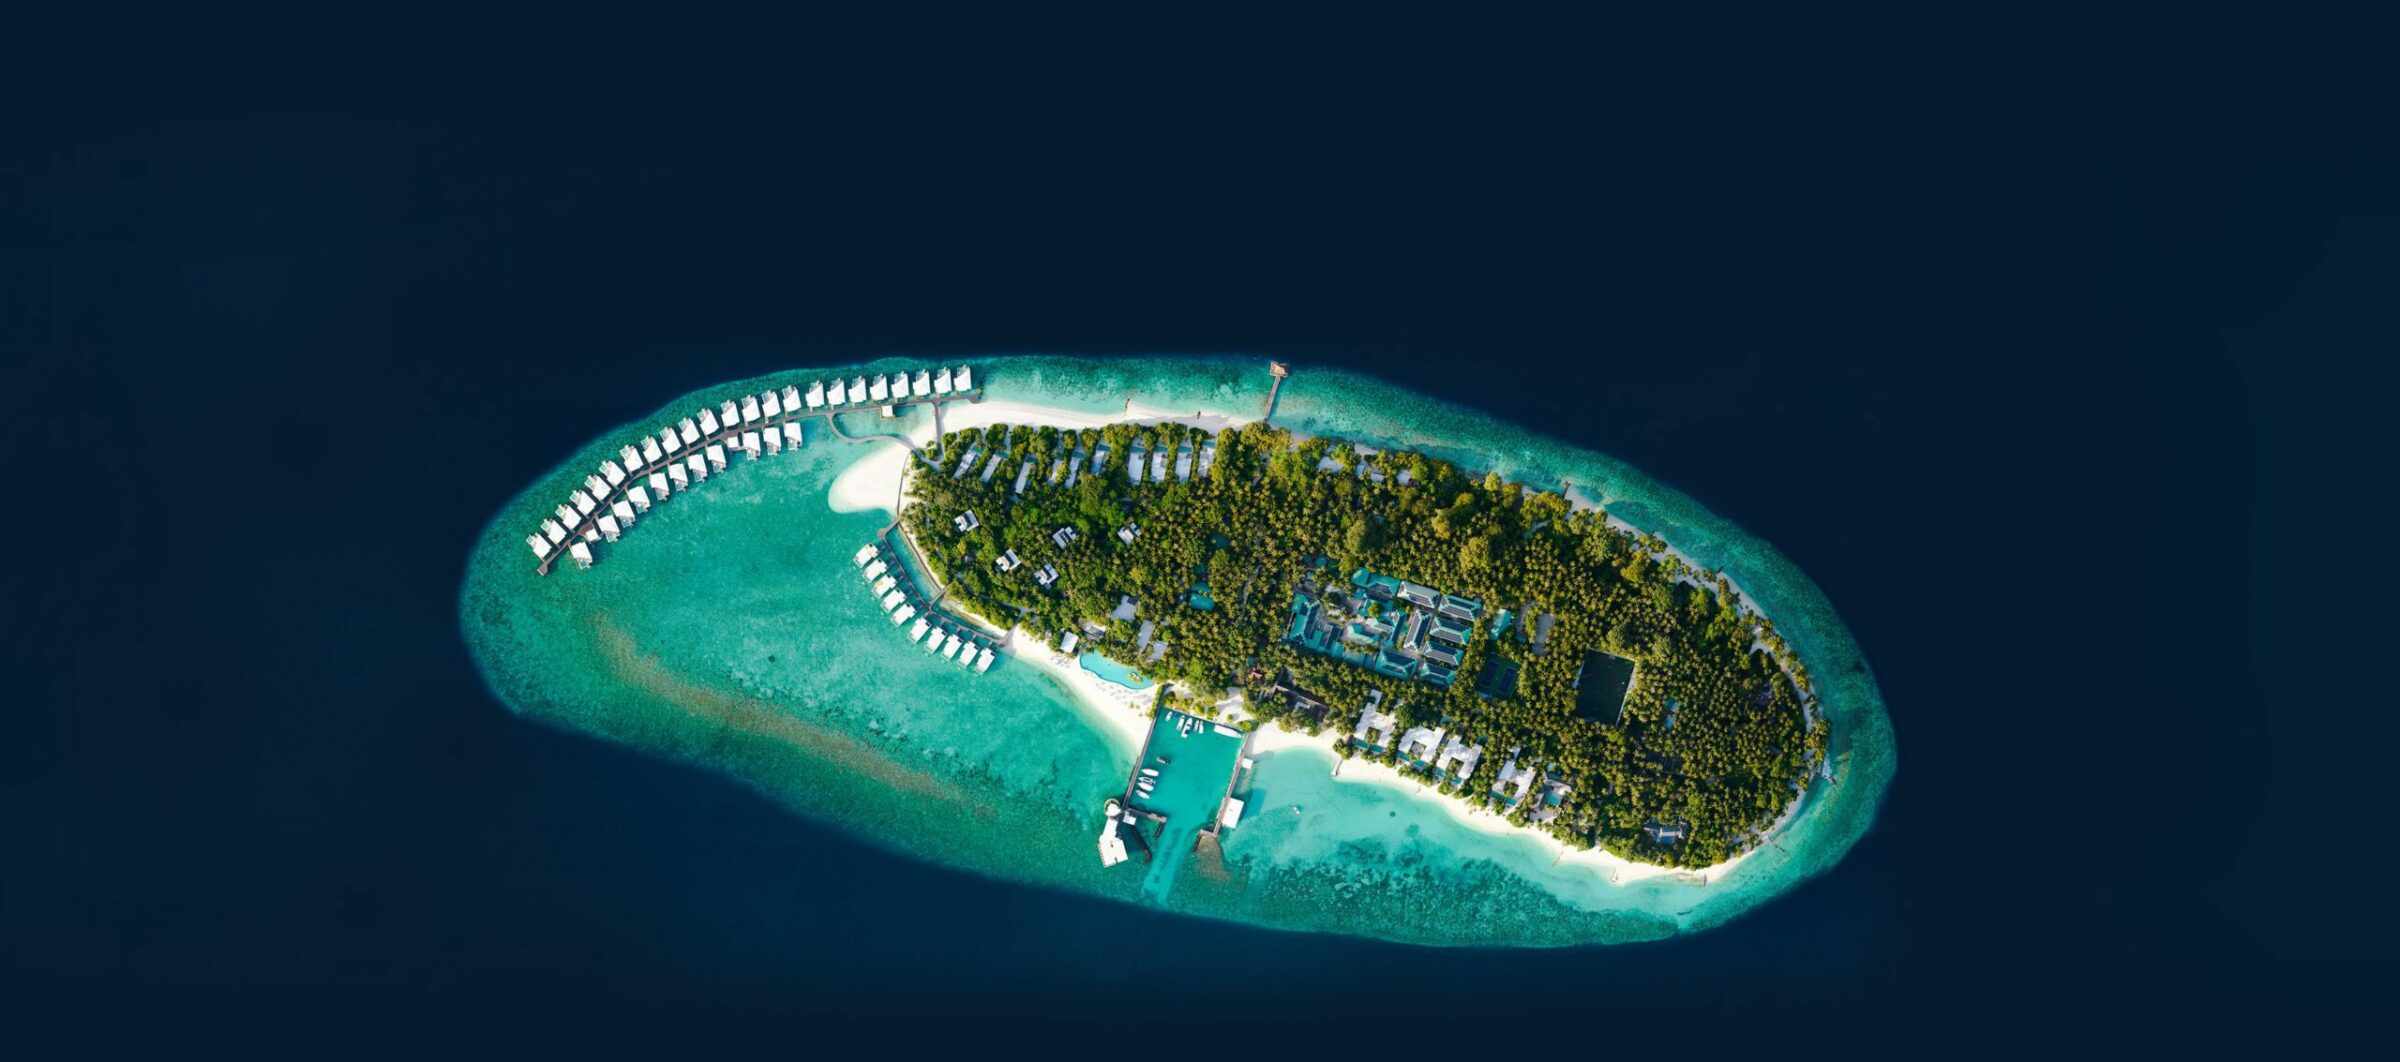 An overhead view of the Amilla Fushi an eco-friendly resort focused on Maldives sustainability.